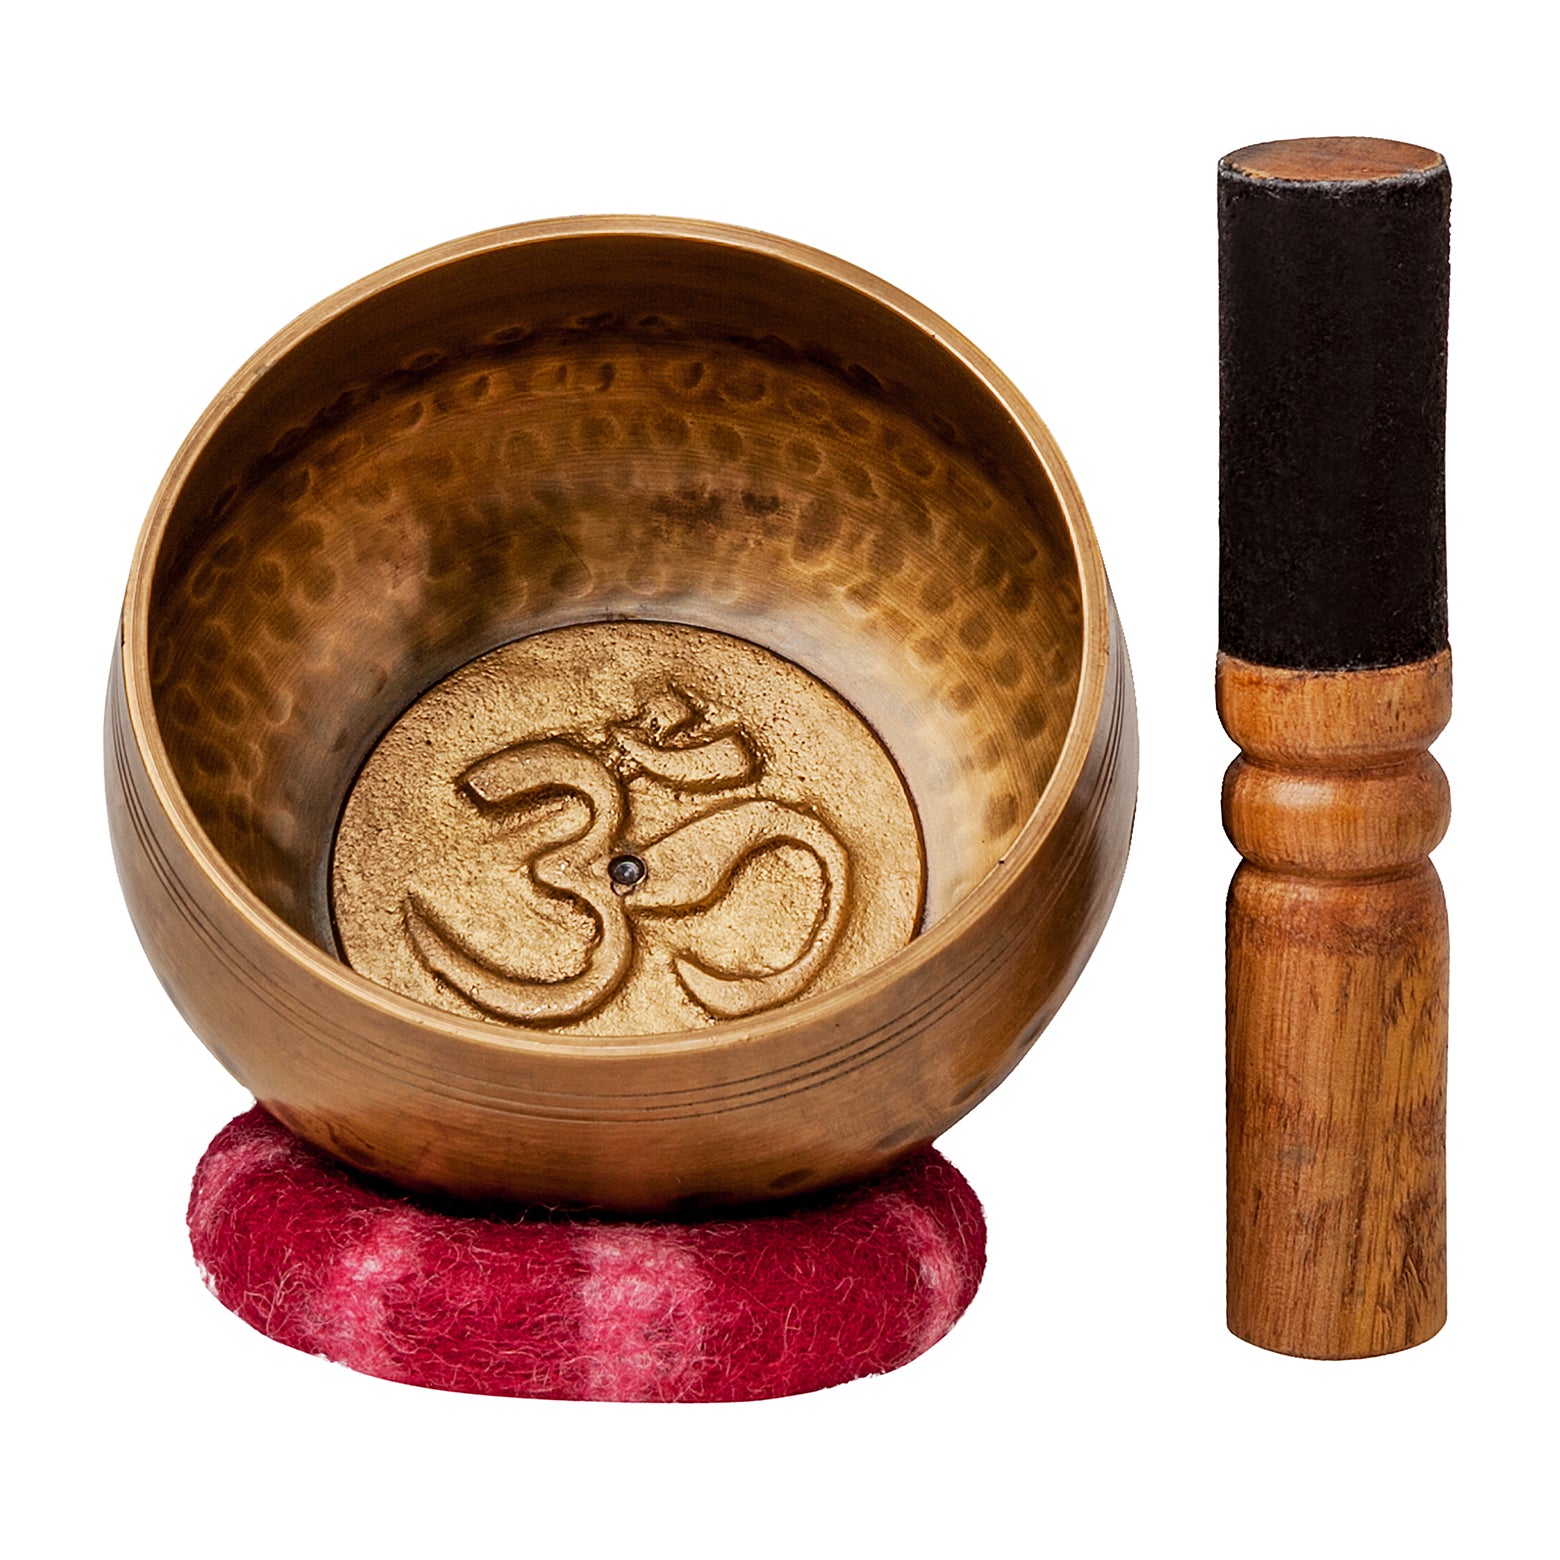 The Truth Ohm and Journal Set - Handmade Singing Bowl, Striker and Lokta Gift Box